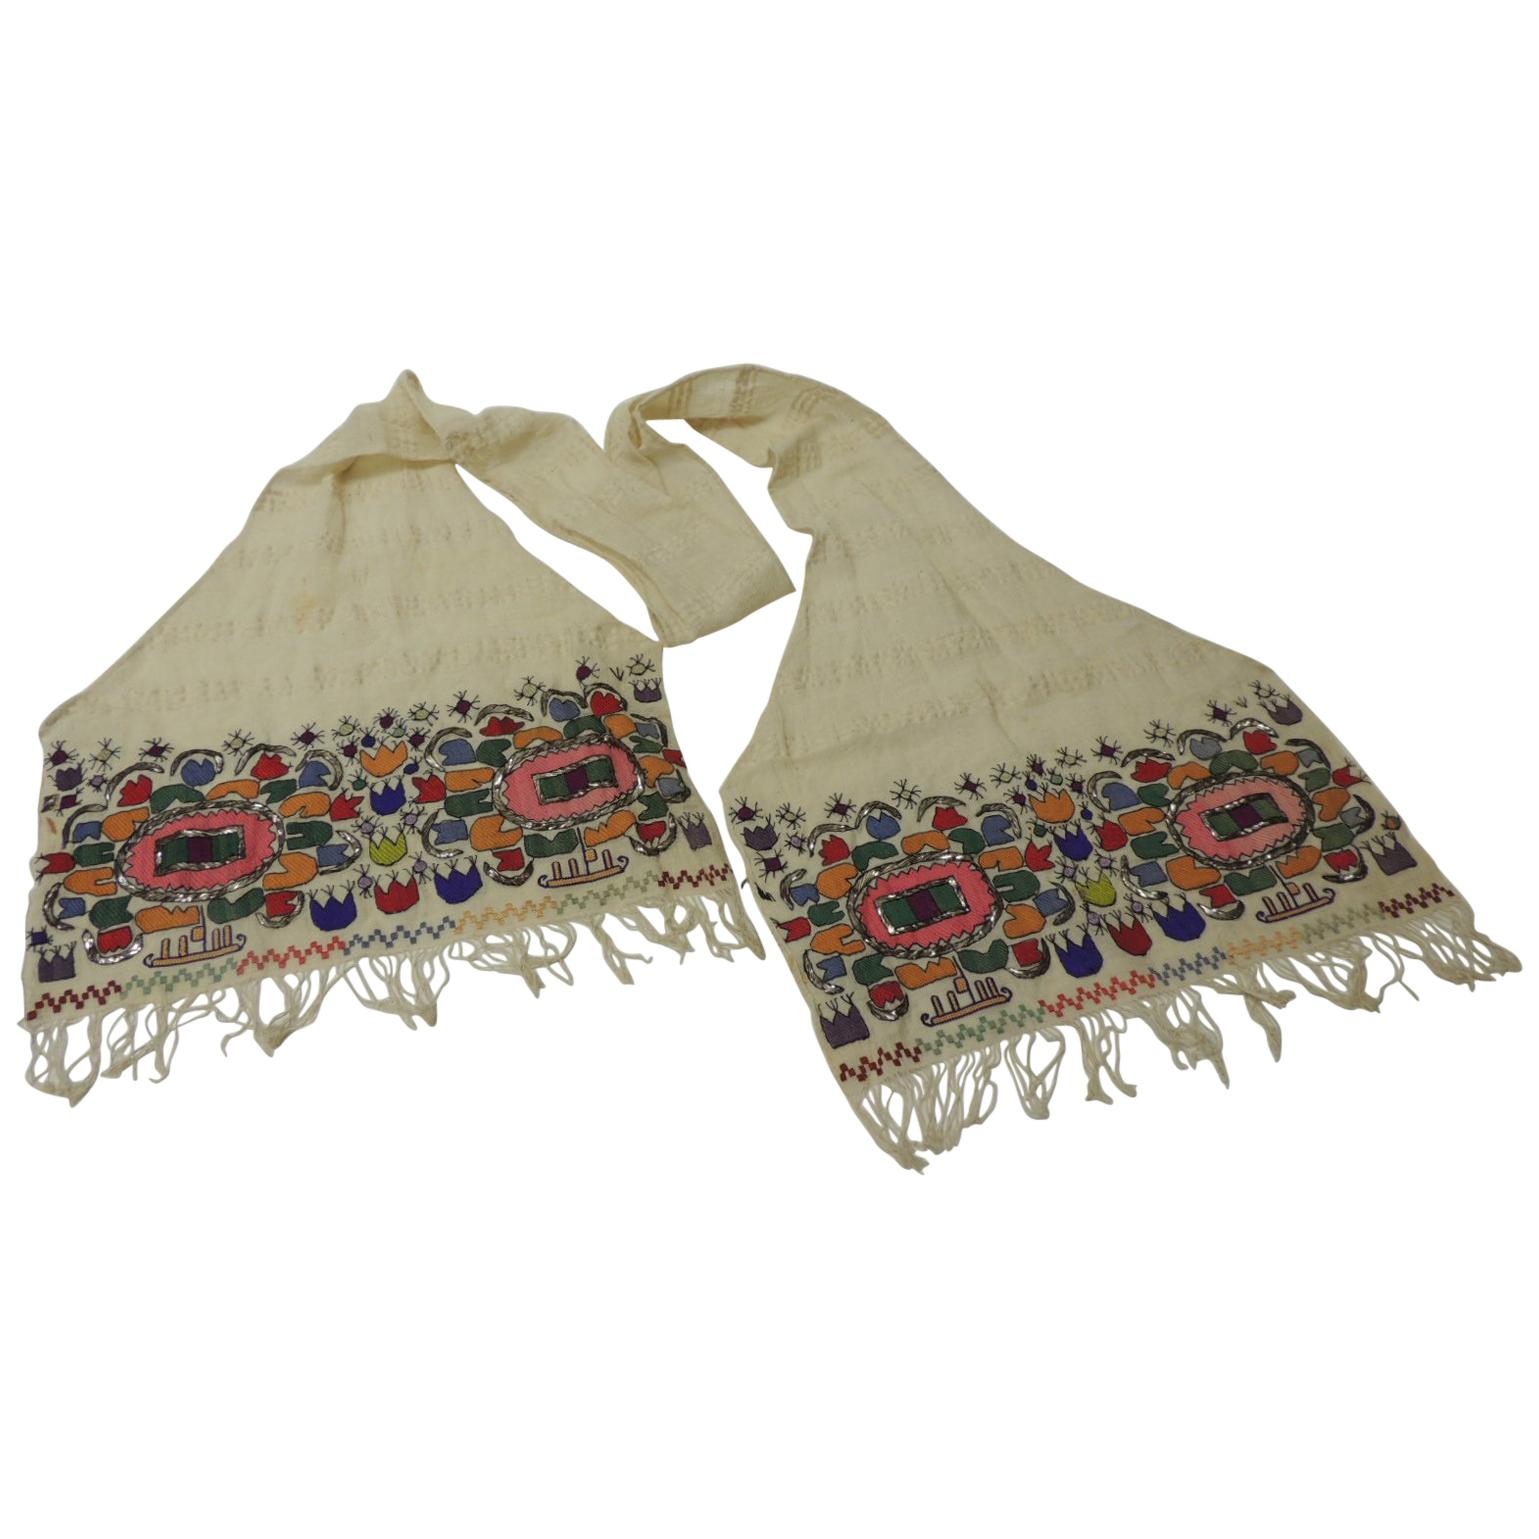 Turkish Linen Scarf with Heavy Embroidery in Silk and Metallic Floss Threads